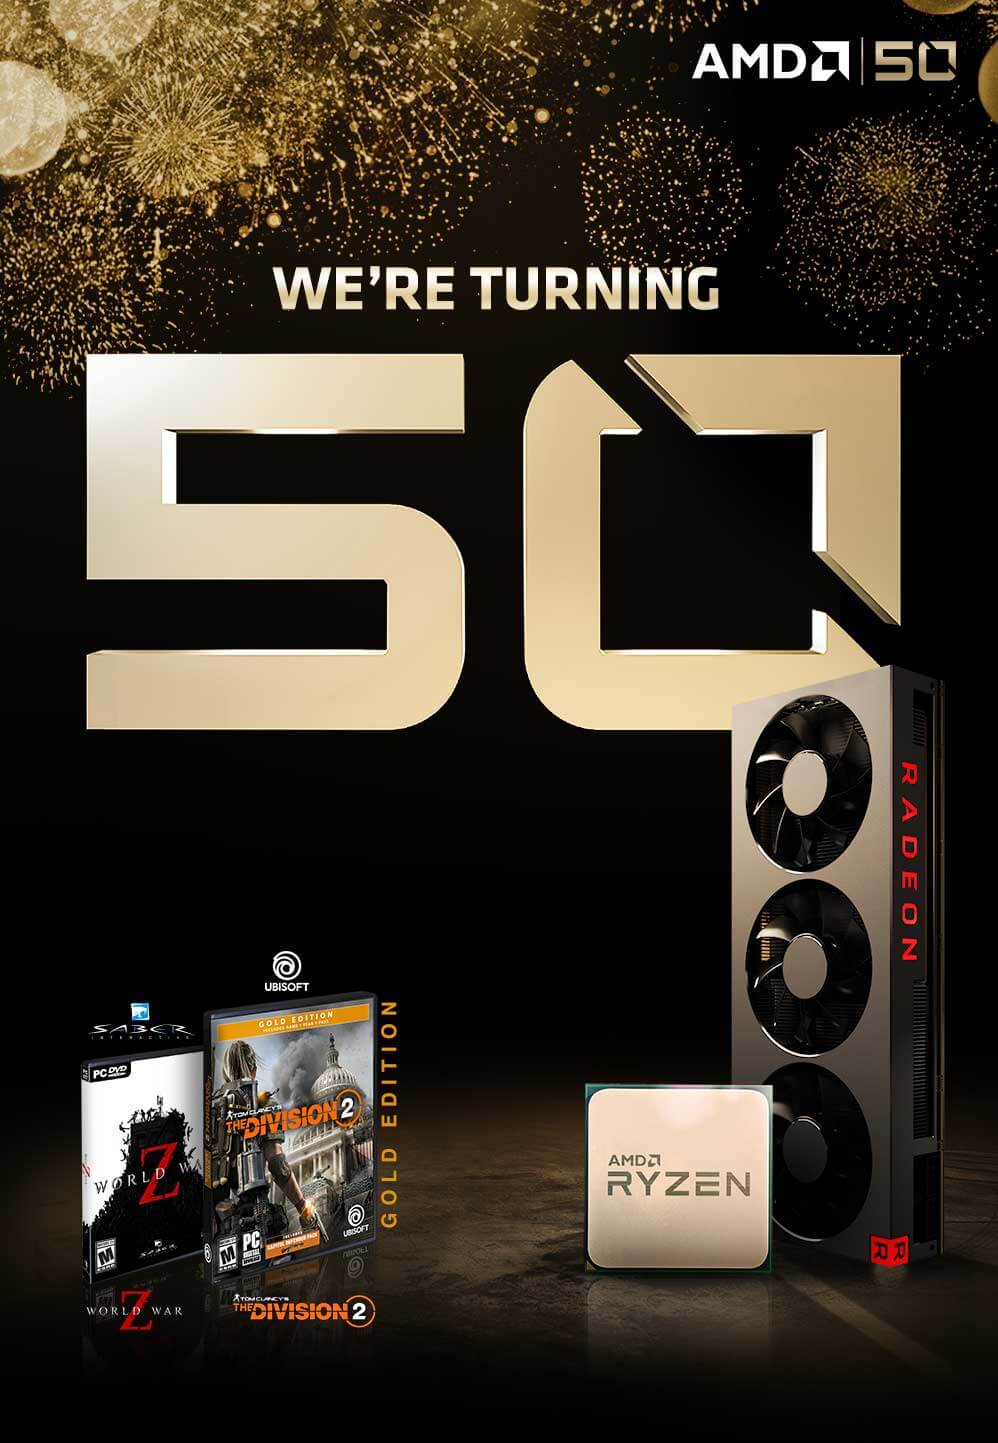 50 Legendary years. 2 Free games. Buy select AMD Radeon graphics cards or AMD Ryzen processors, get 2 games free and more!